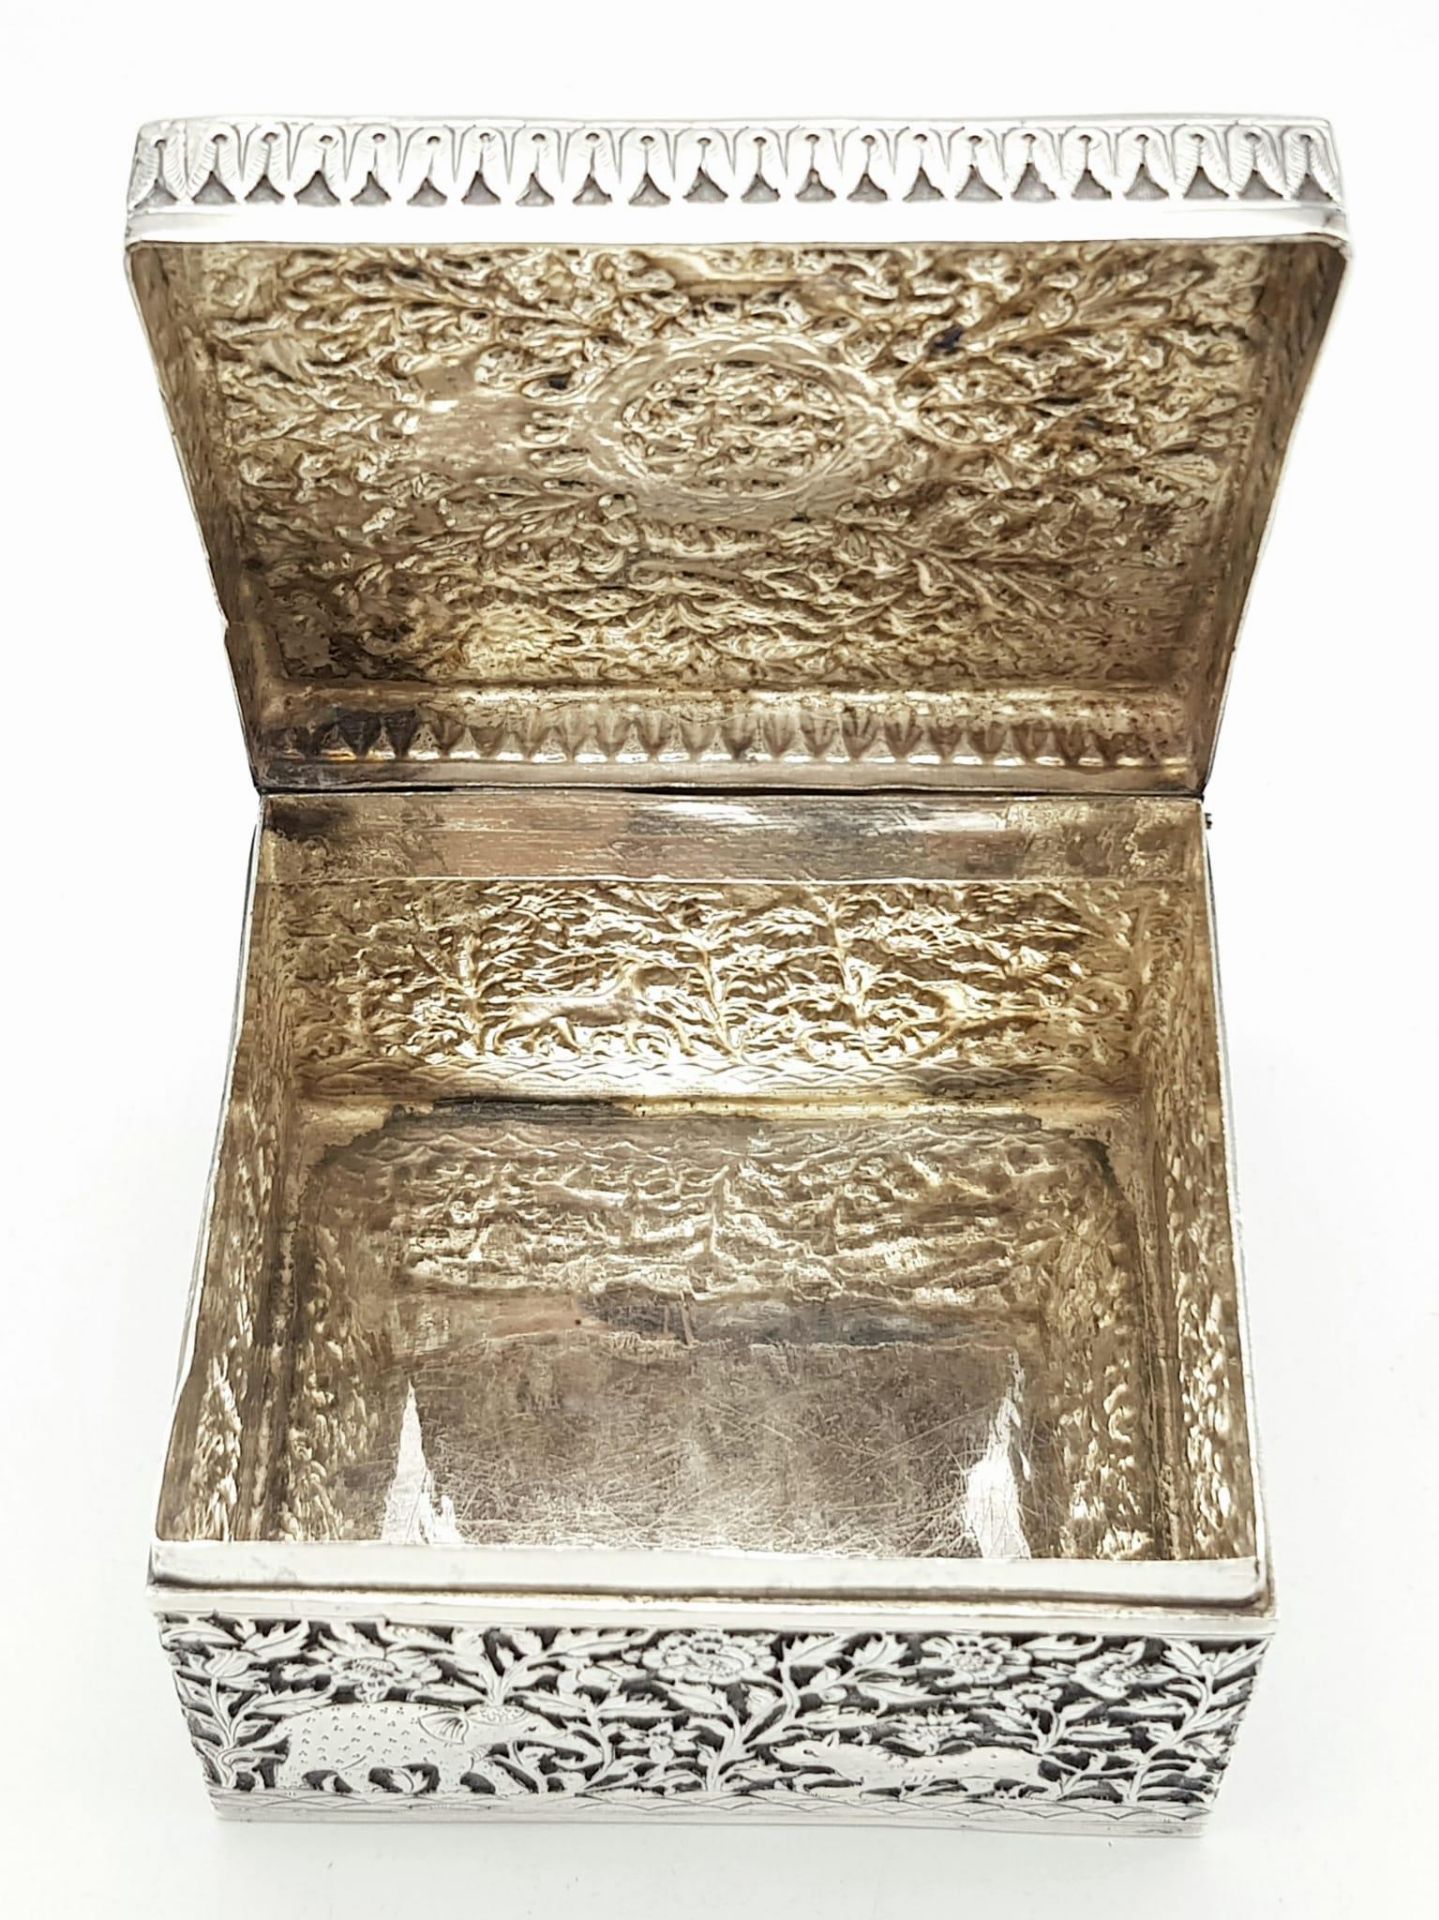 A SOLID SILVER HINGED TRINKET BOX HAND ENGRAVED WITH AN AFRICAN THEME, IN VERY GOOD CONDITION AND - Image 7 of 15